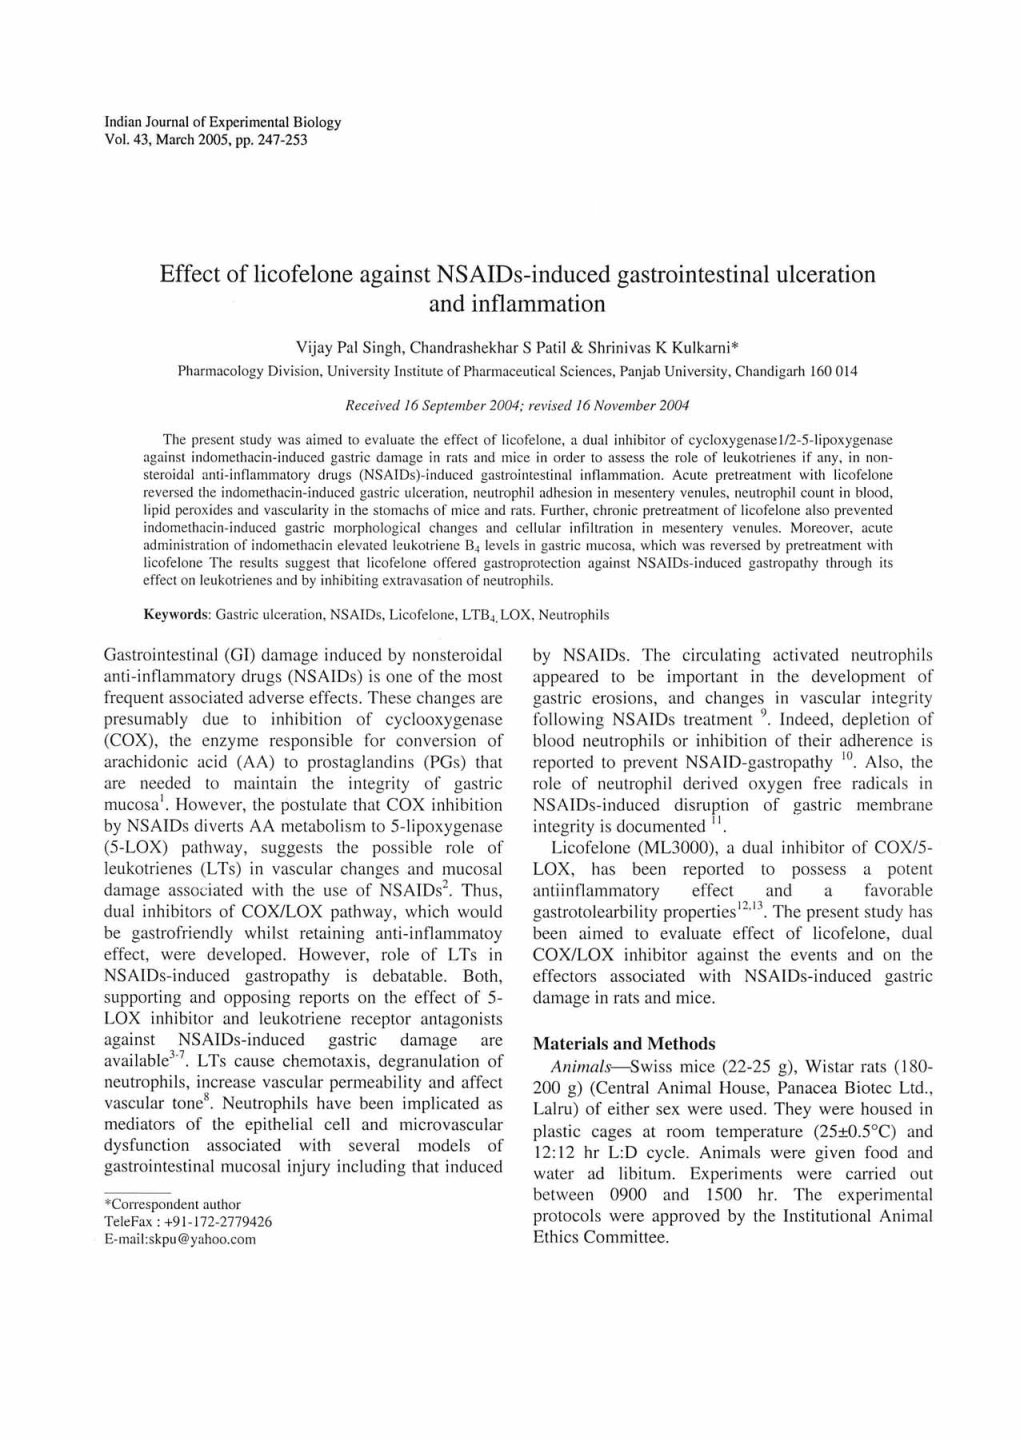 Effect of Licofelone Against Nsaids-Induced Gastrointestinal Ulceration and Inflammation